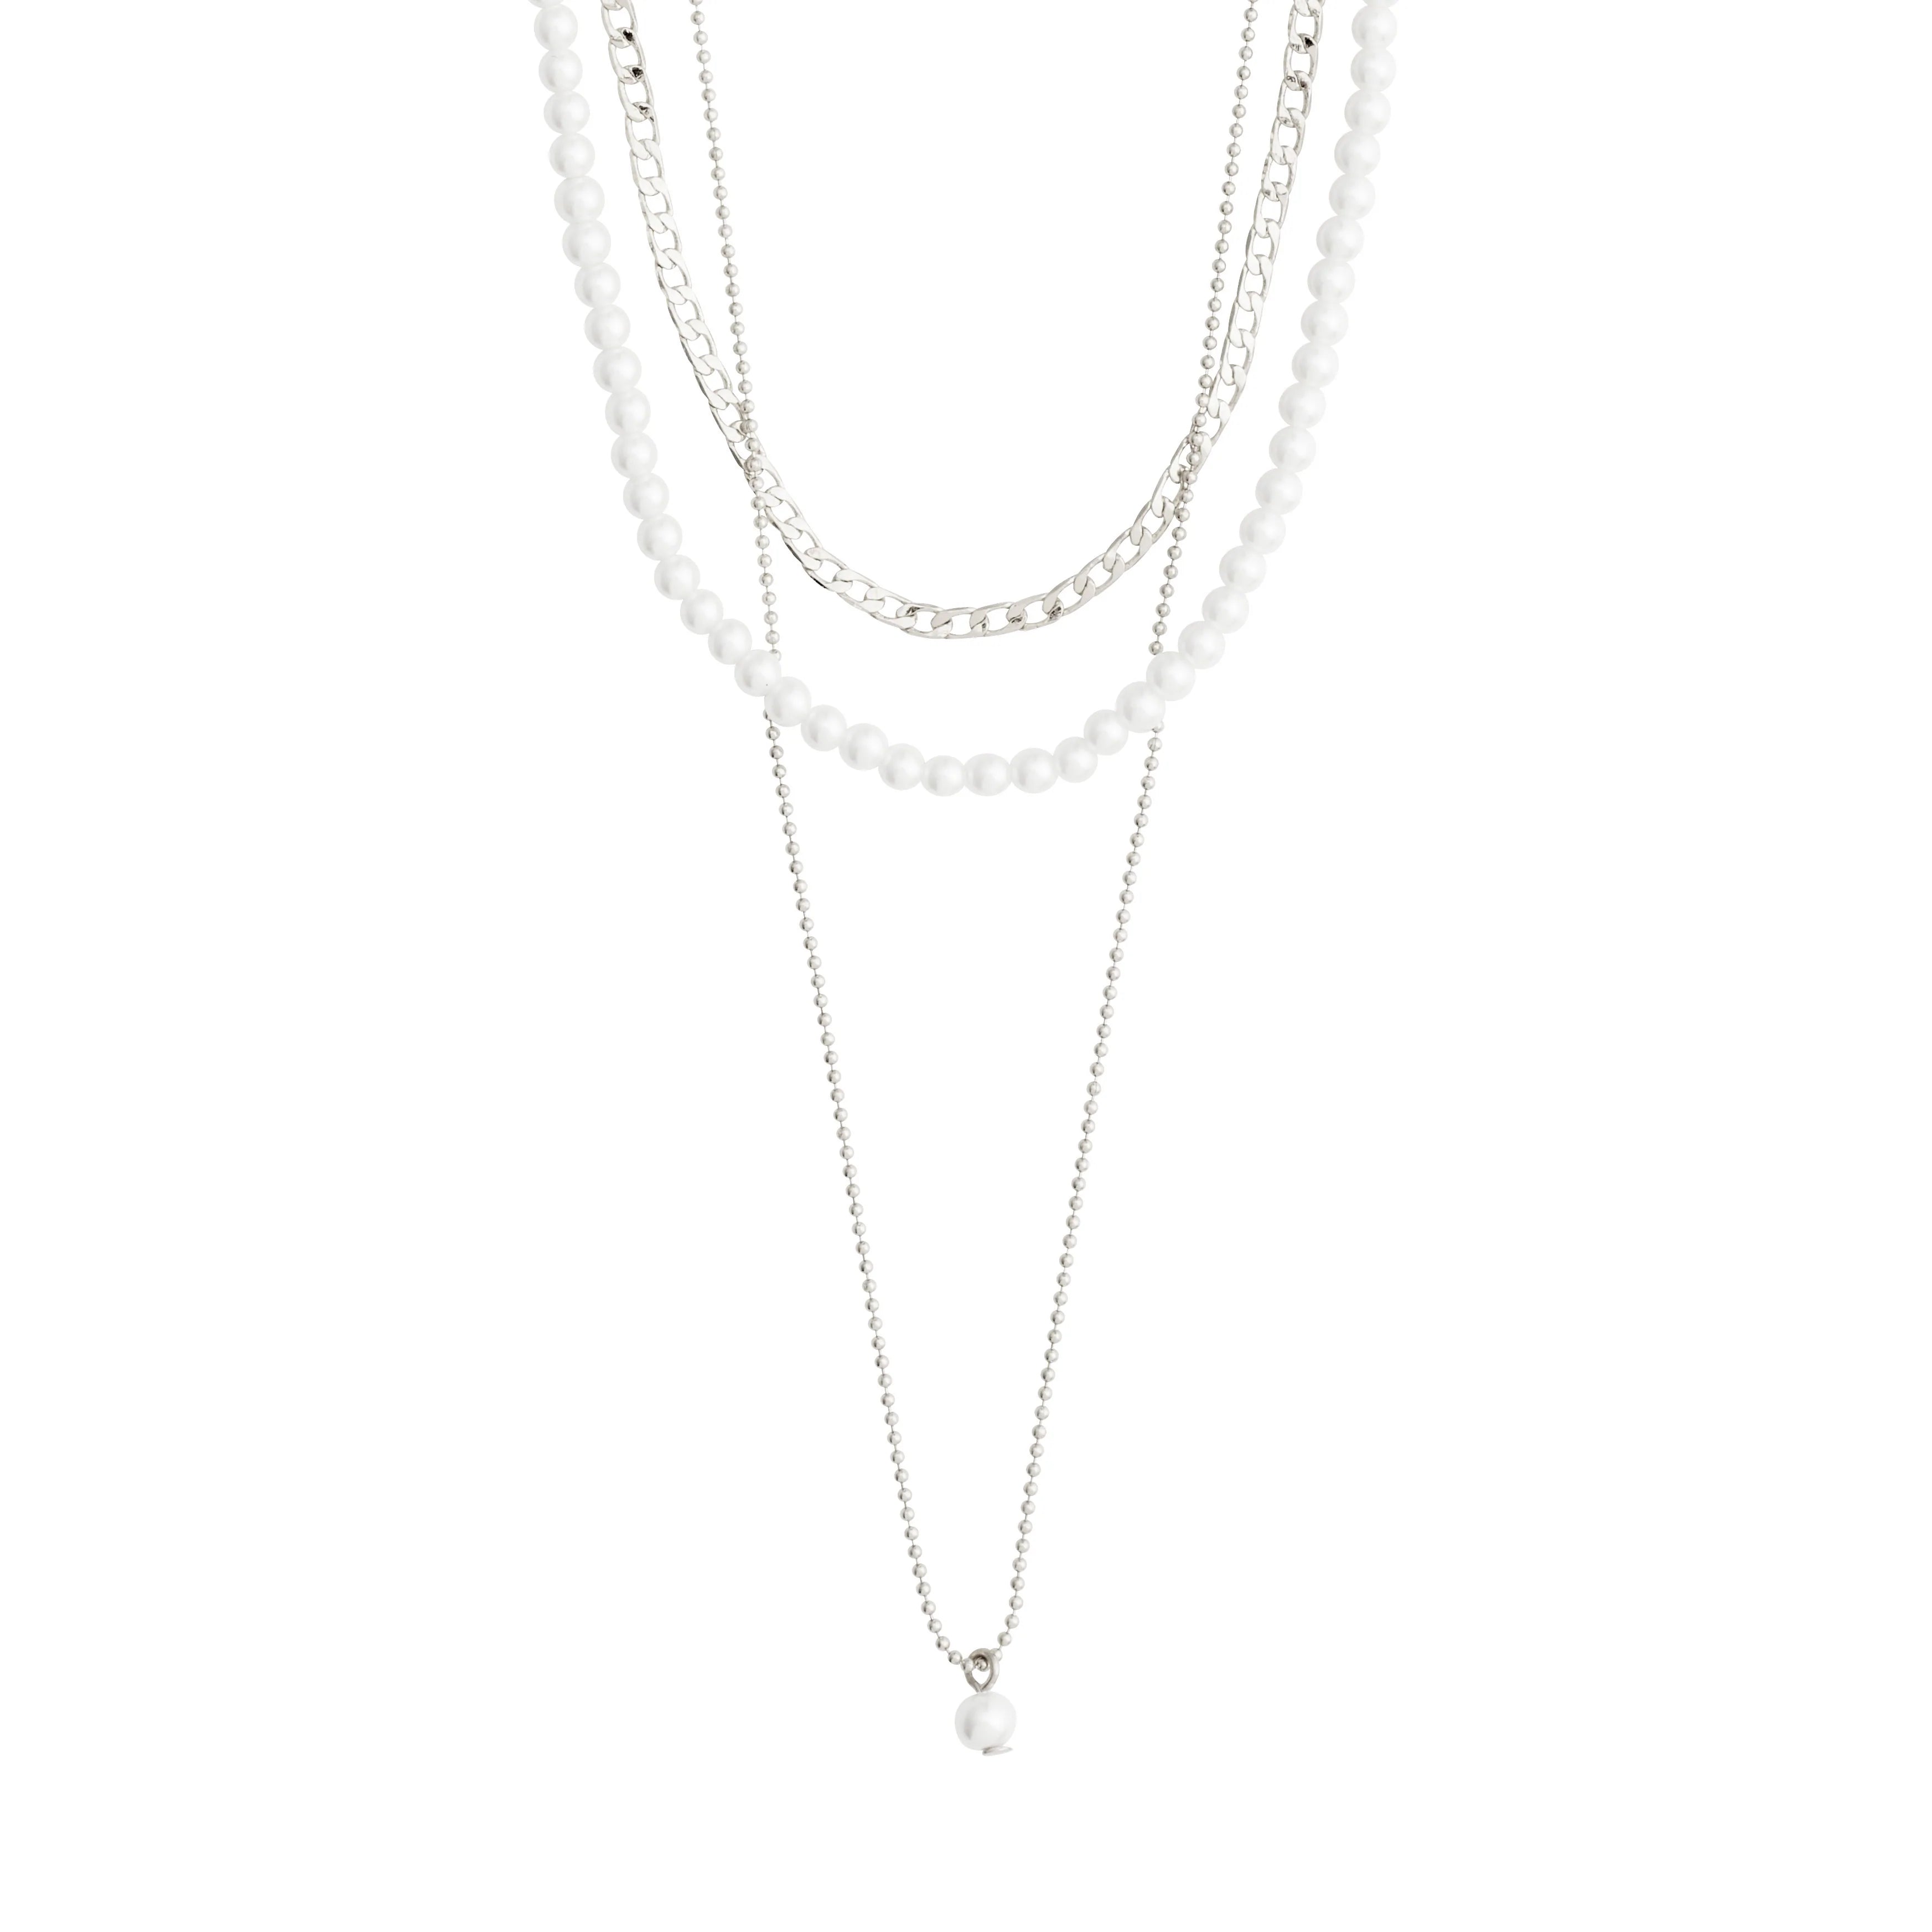 Baker Necklace 3-in-1 - Silver Plated